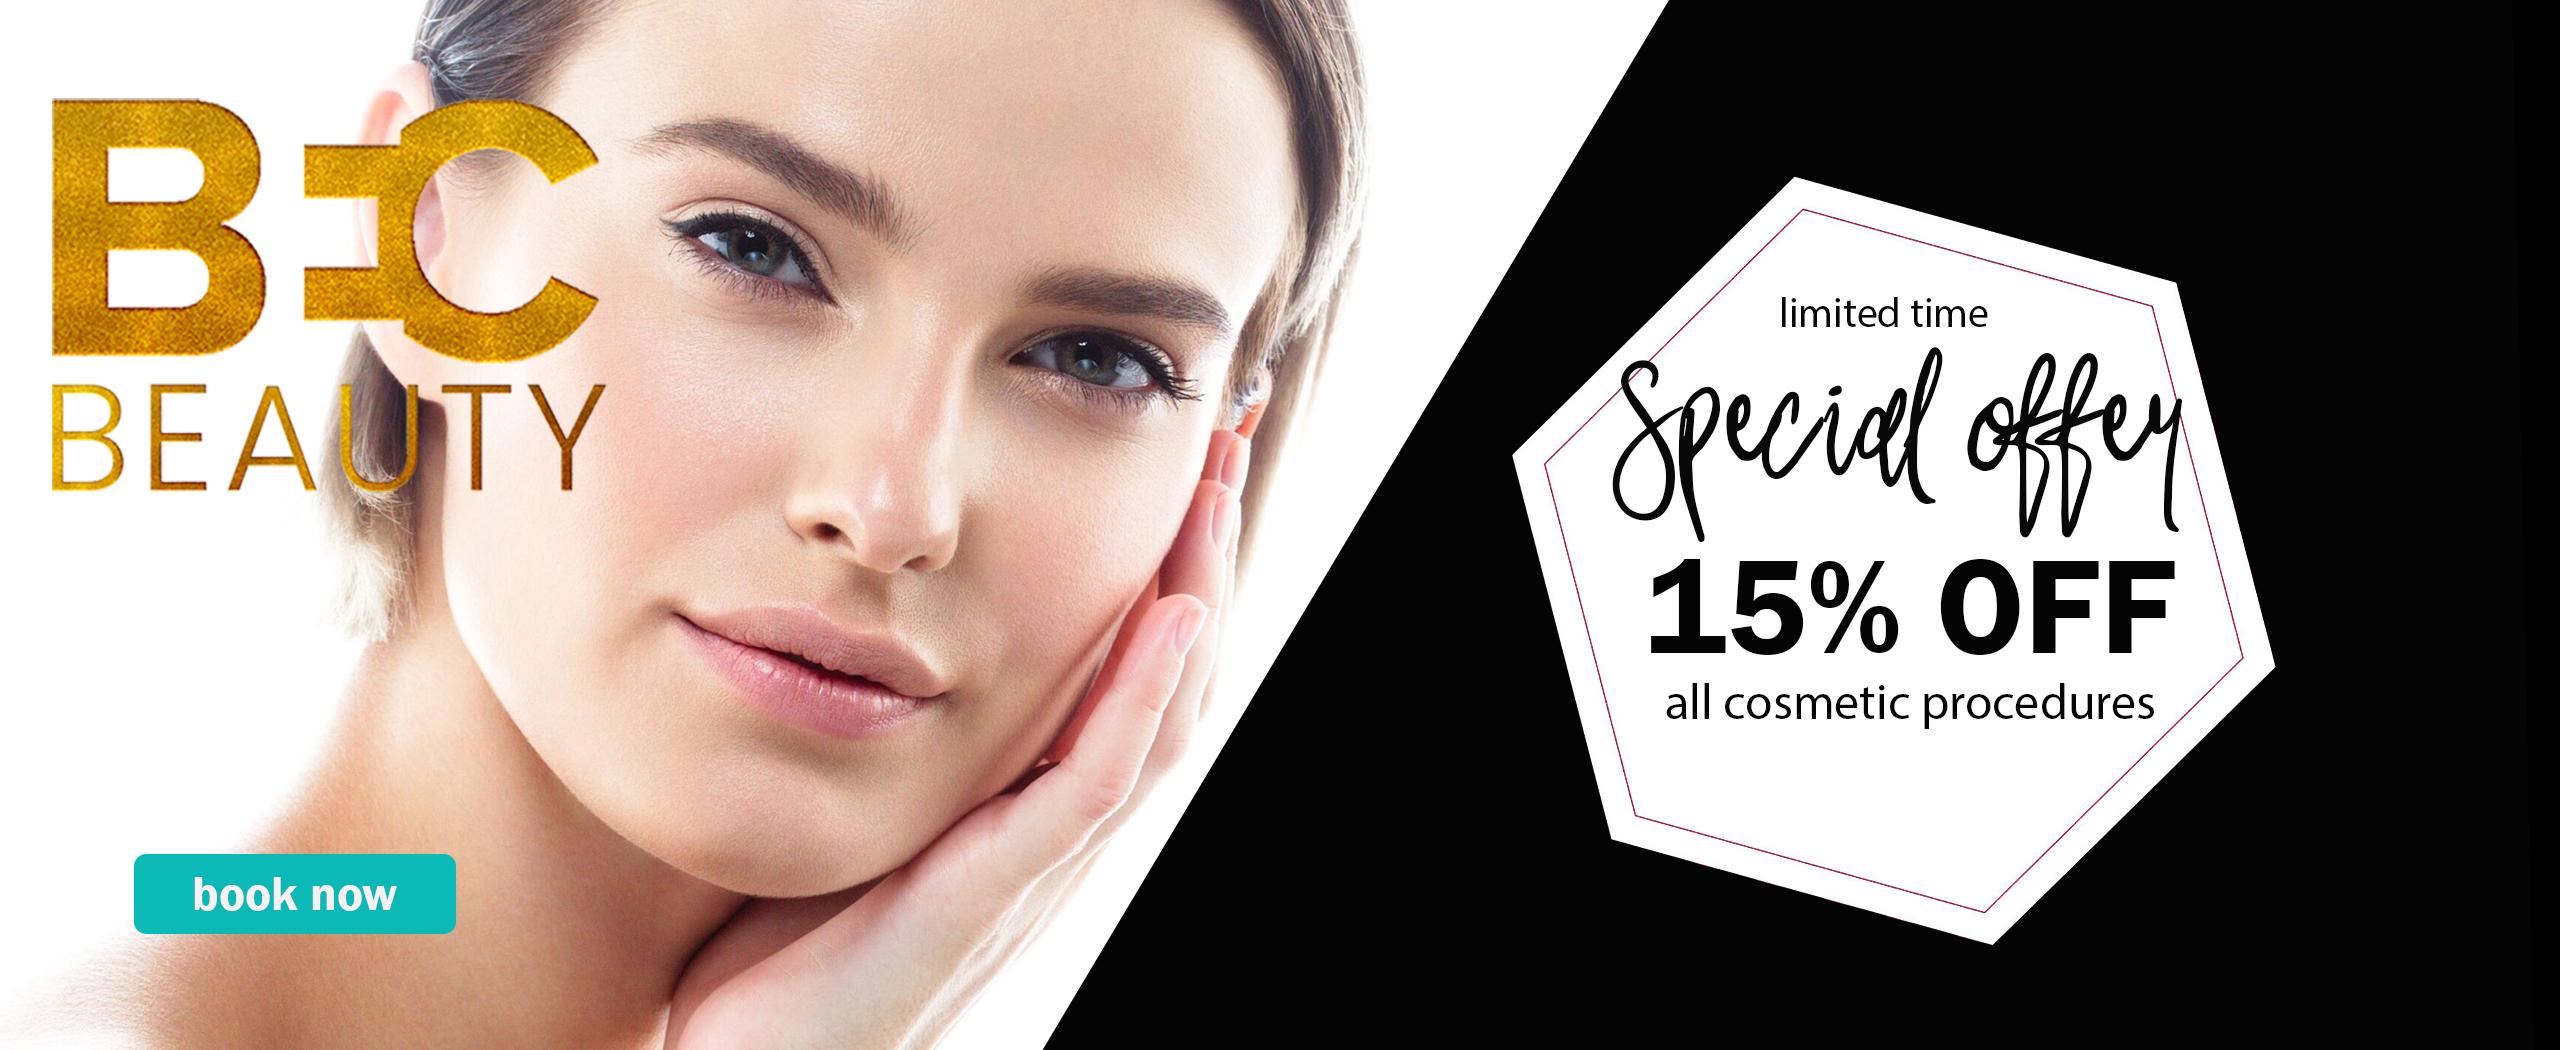 BEC Beauty Special Offer Limited Time Banner One